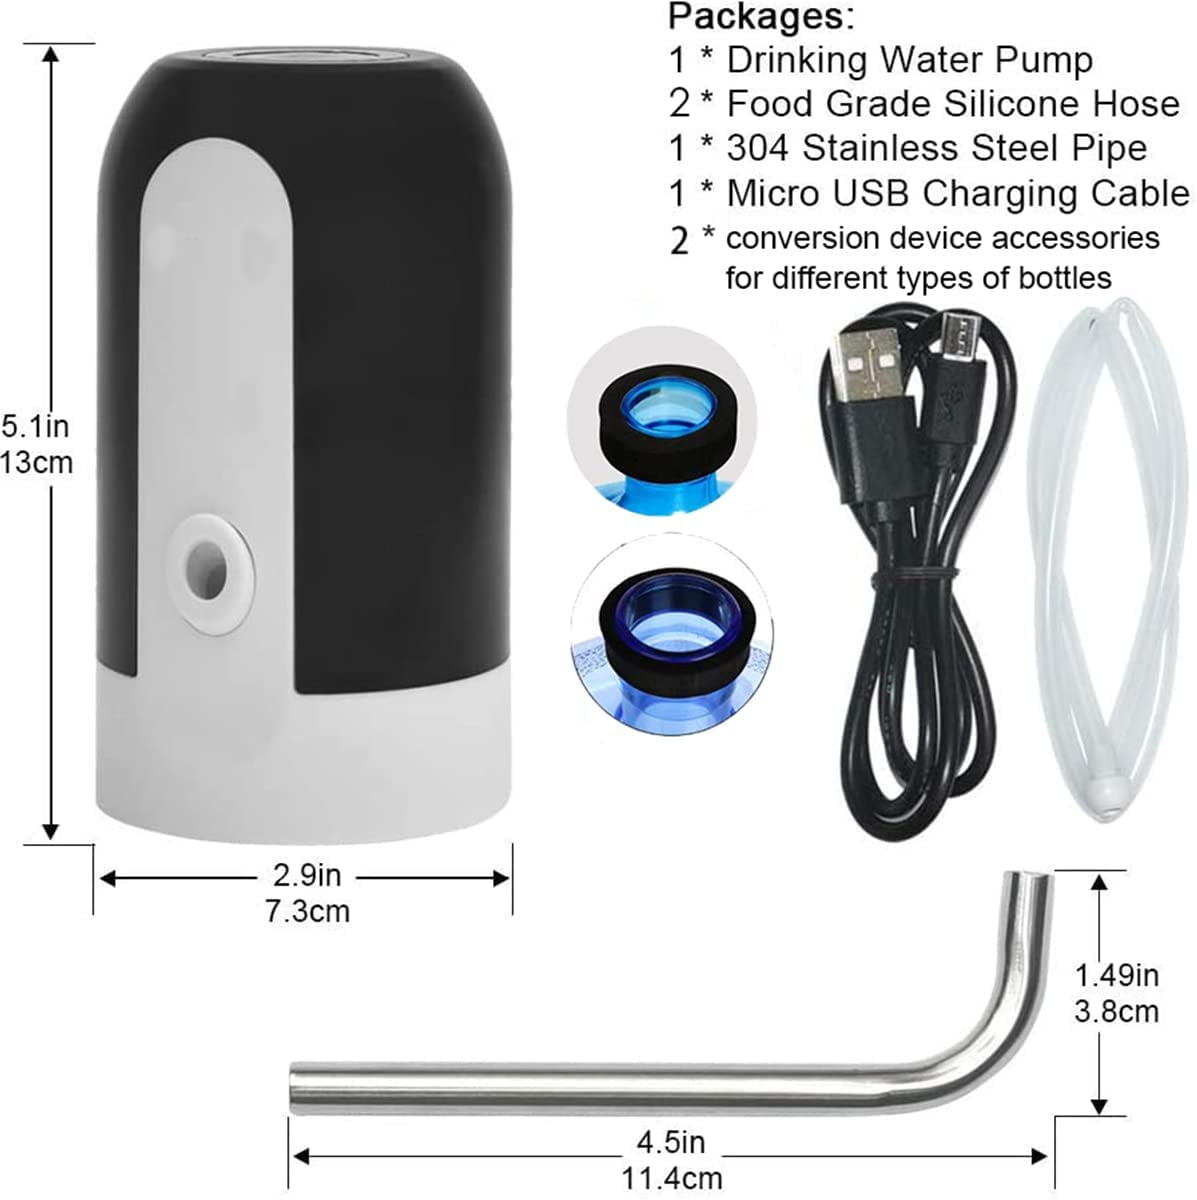 Water Bottle Pump Bonus 2 Adapters for Various Caliber Water Jugs,USB Rechargeable Automatic Drinking Water Switch,Portable Electric Water Dispenser with 2 Free to Cut Hoses. 